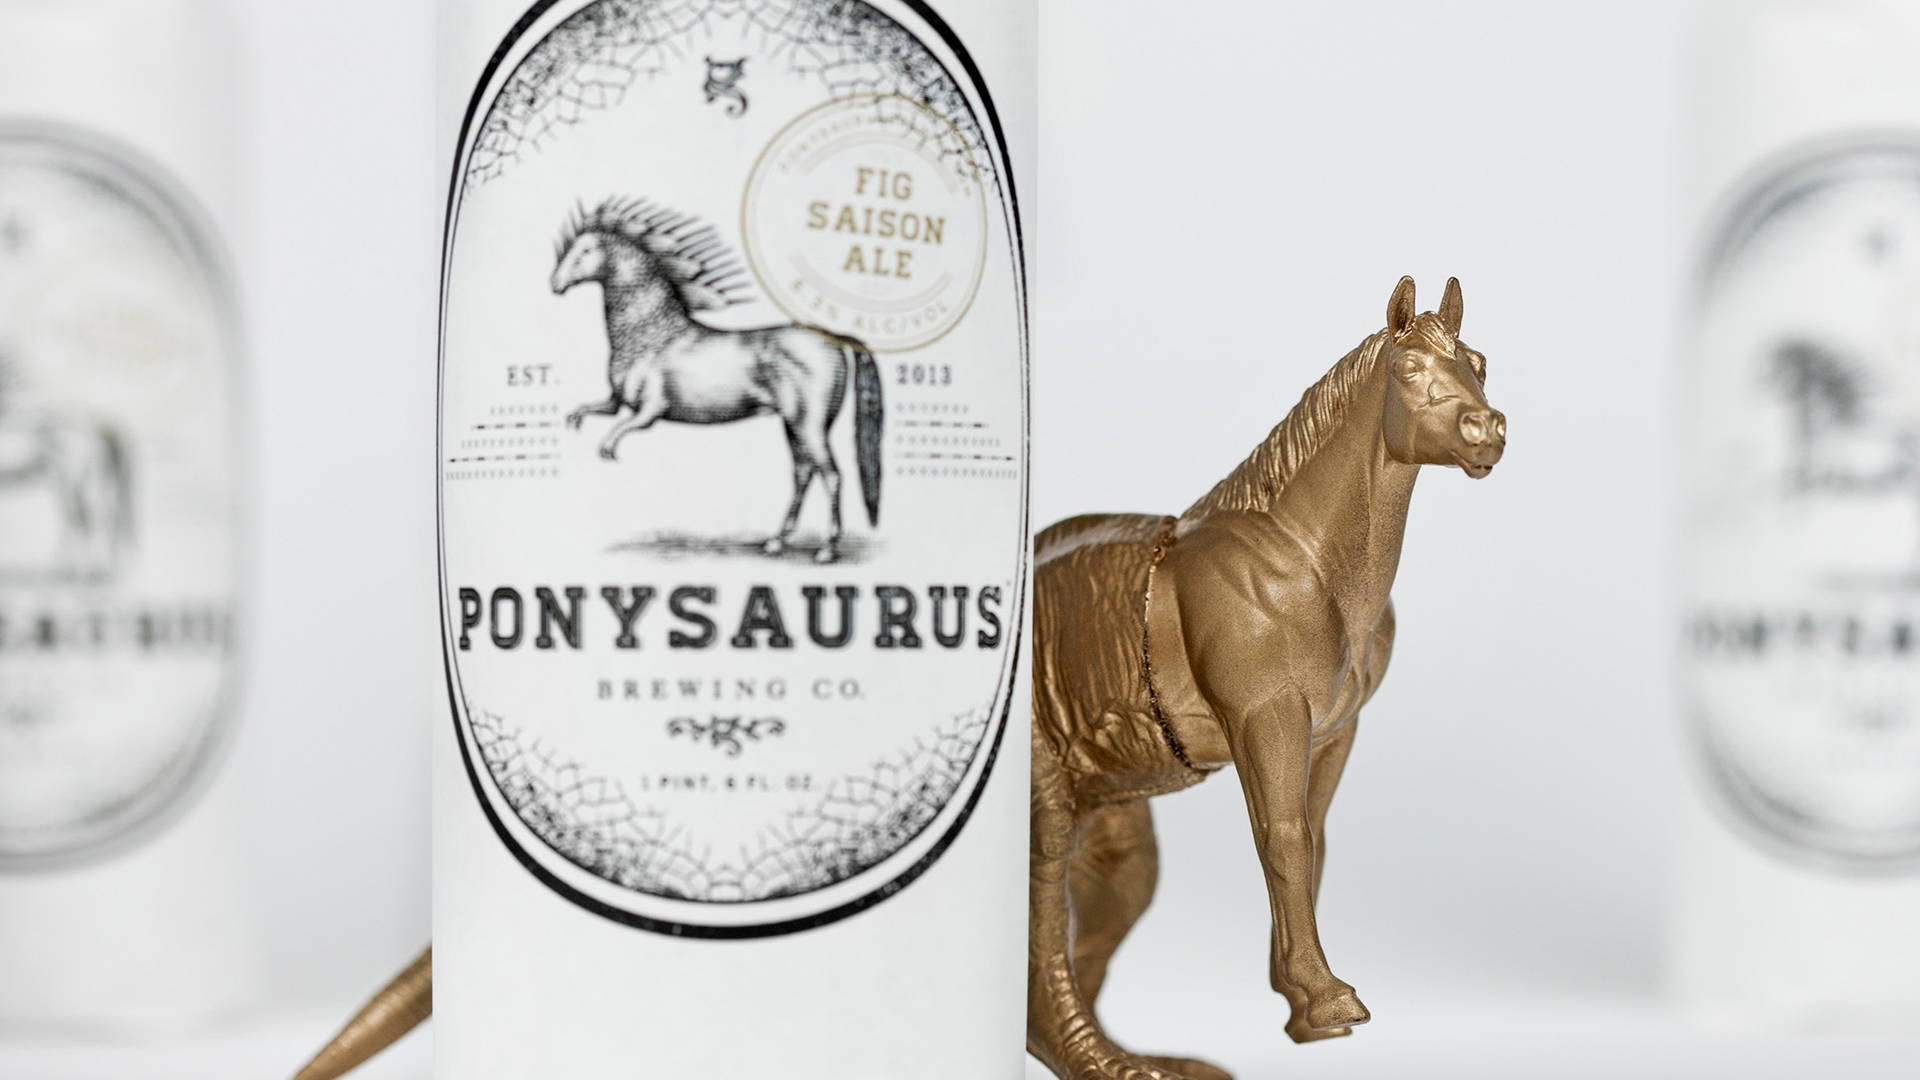 Featured image for Ponysaurus Brewing Co.